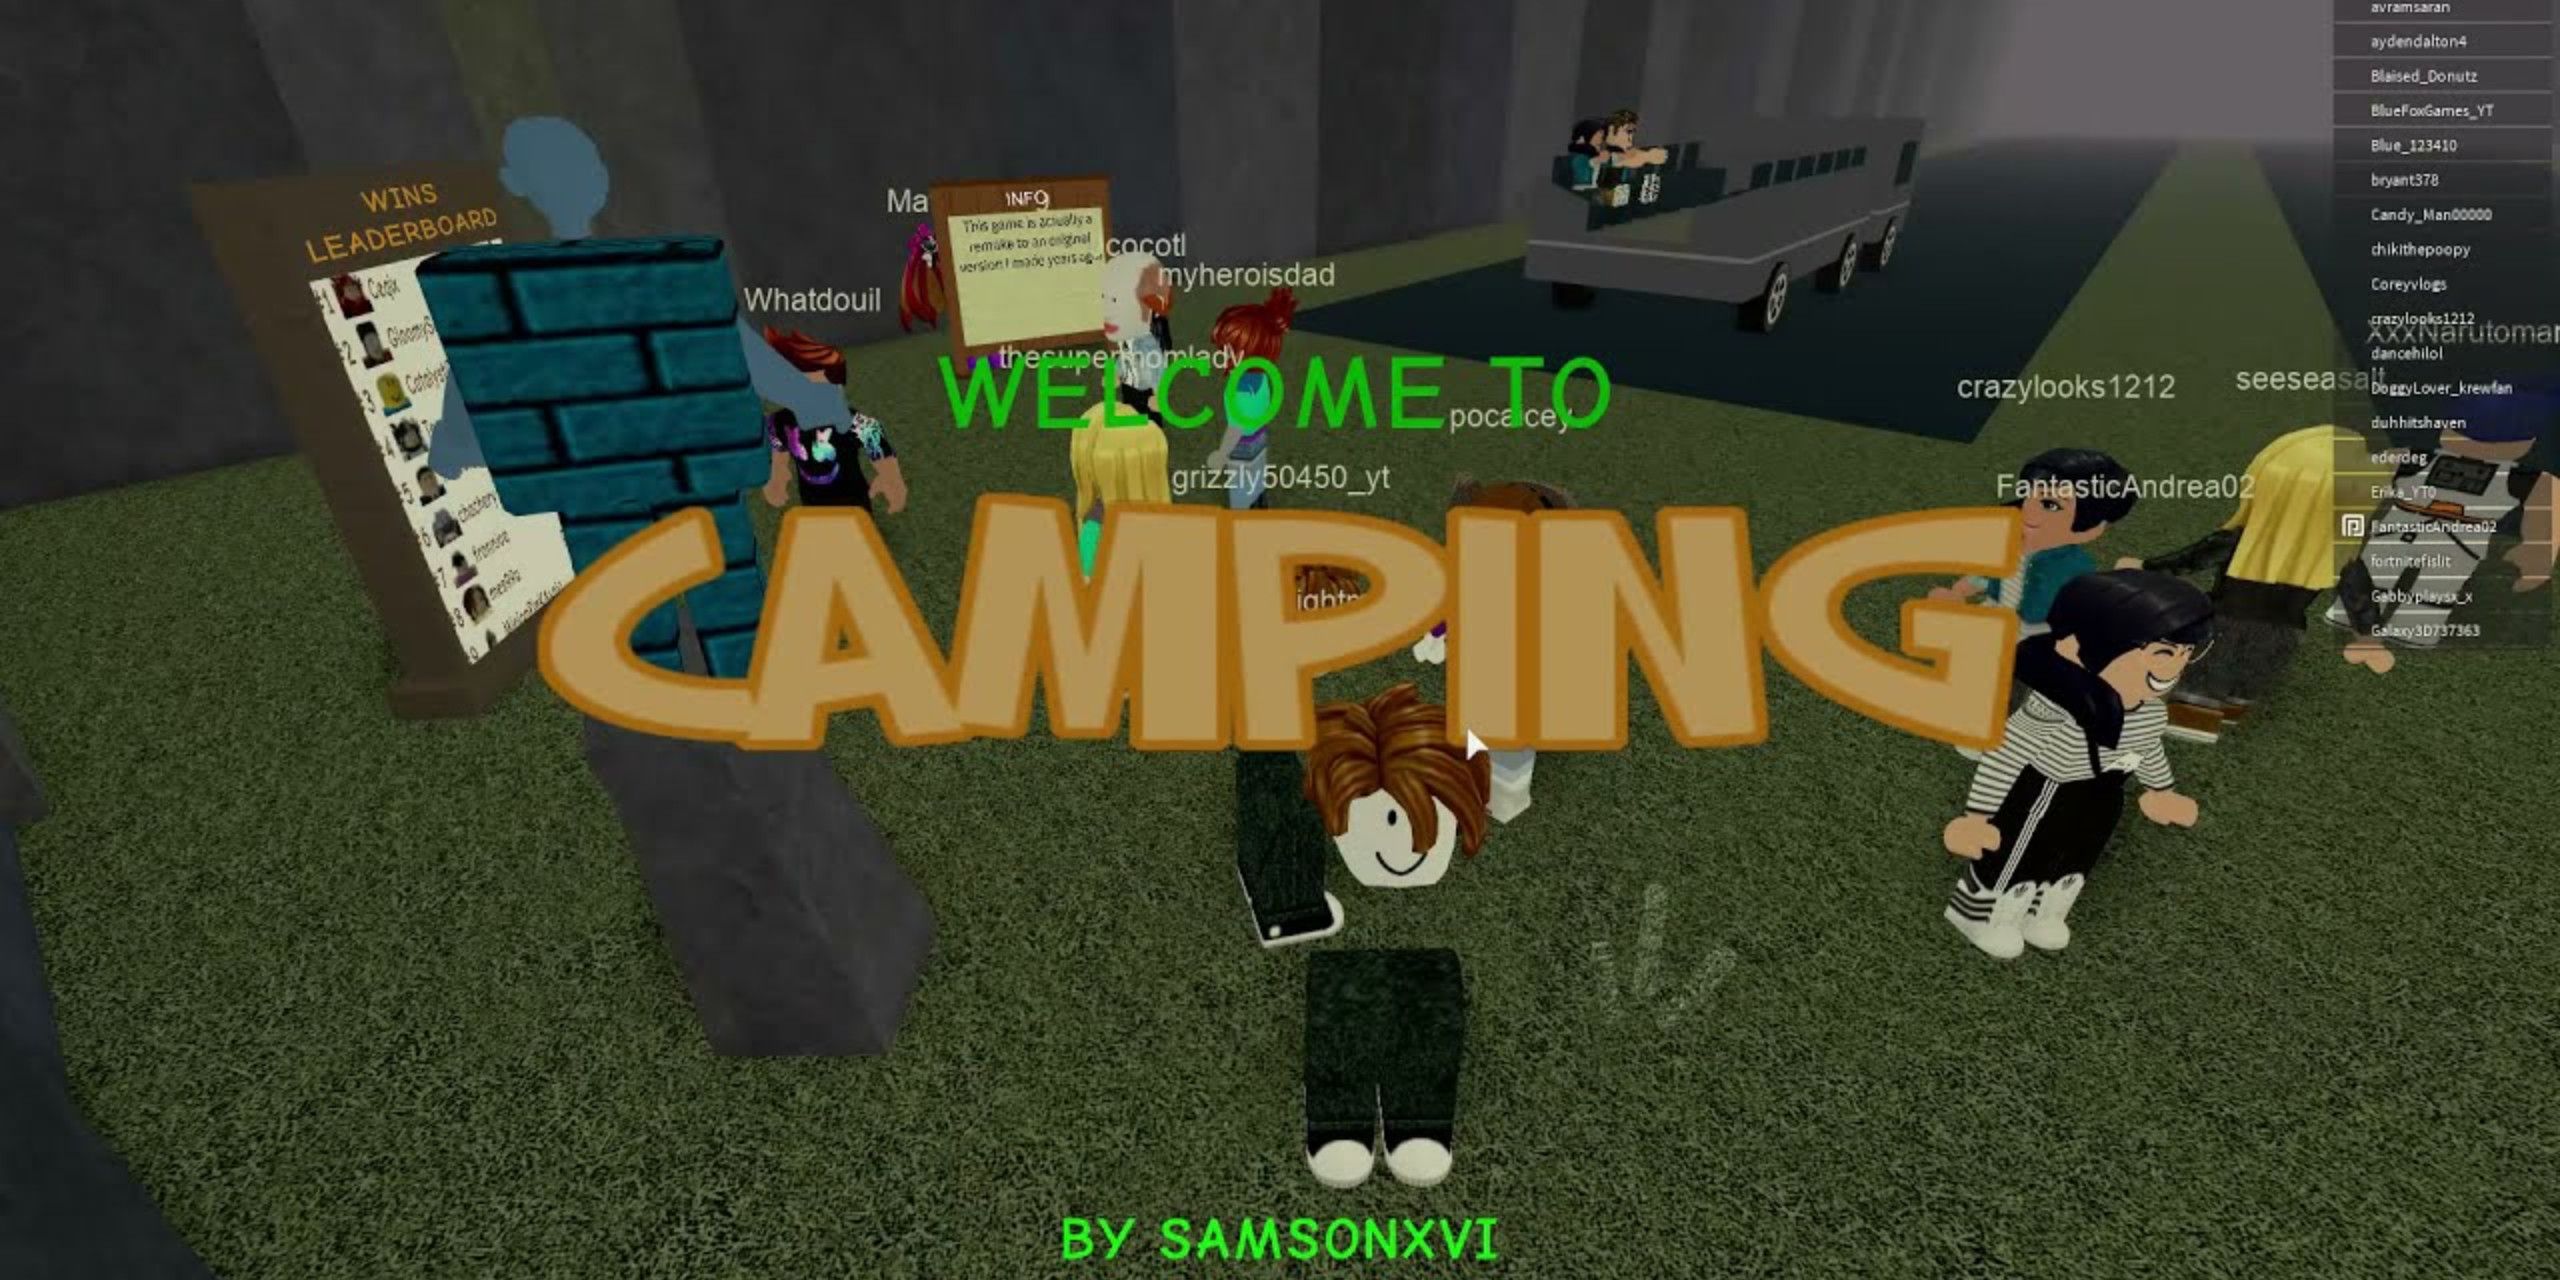 the beginning of camping where players are taken to campsite via truck